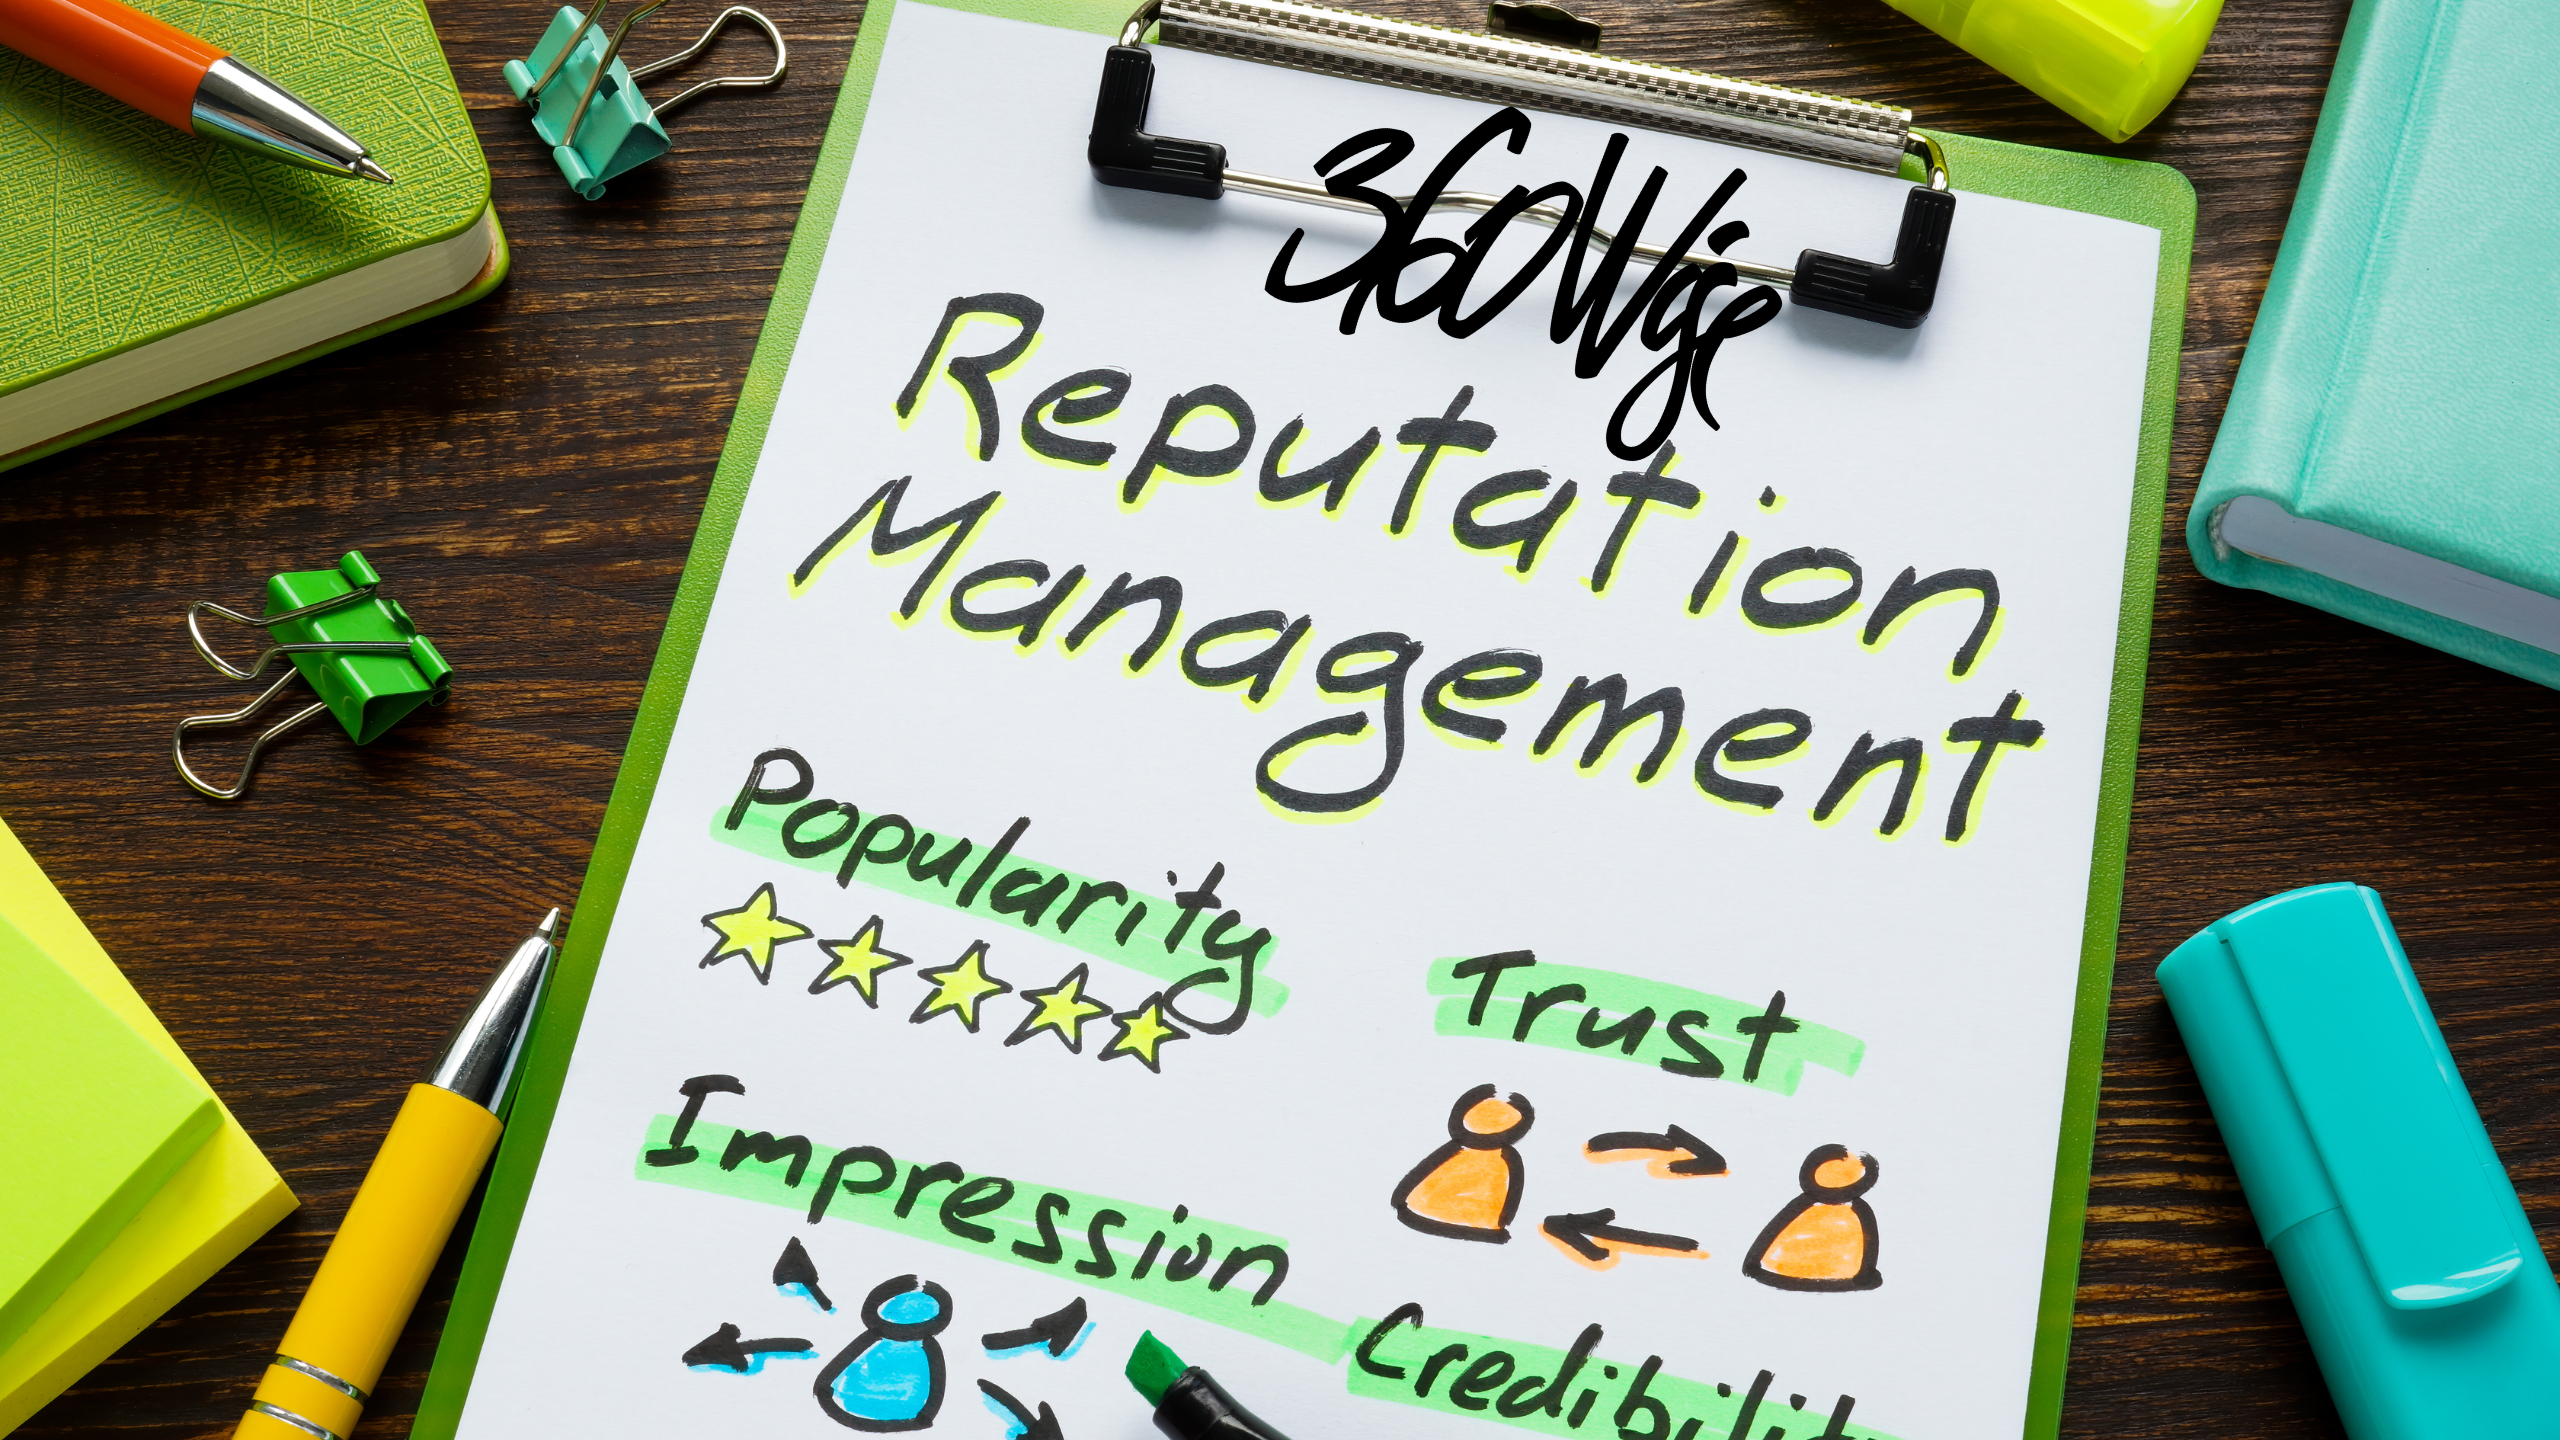 The Power of Brand and Reputation Management - 360WiSE